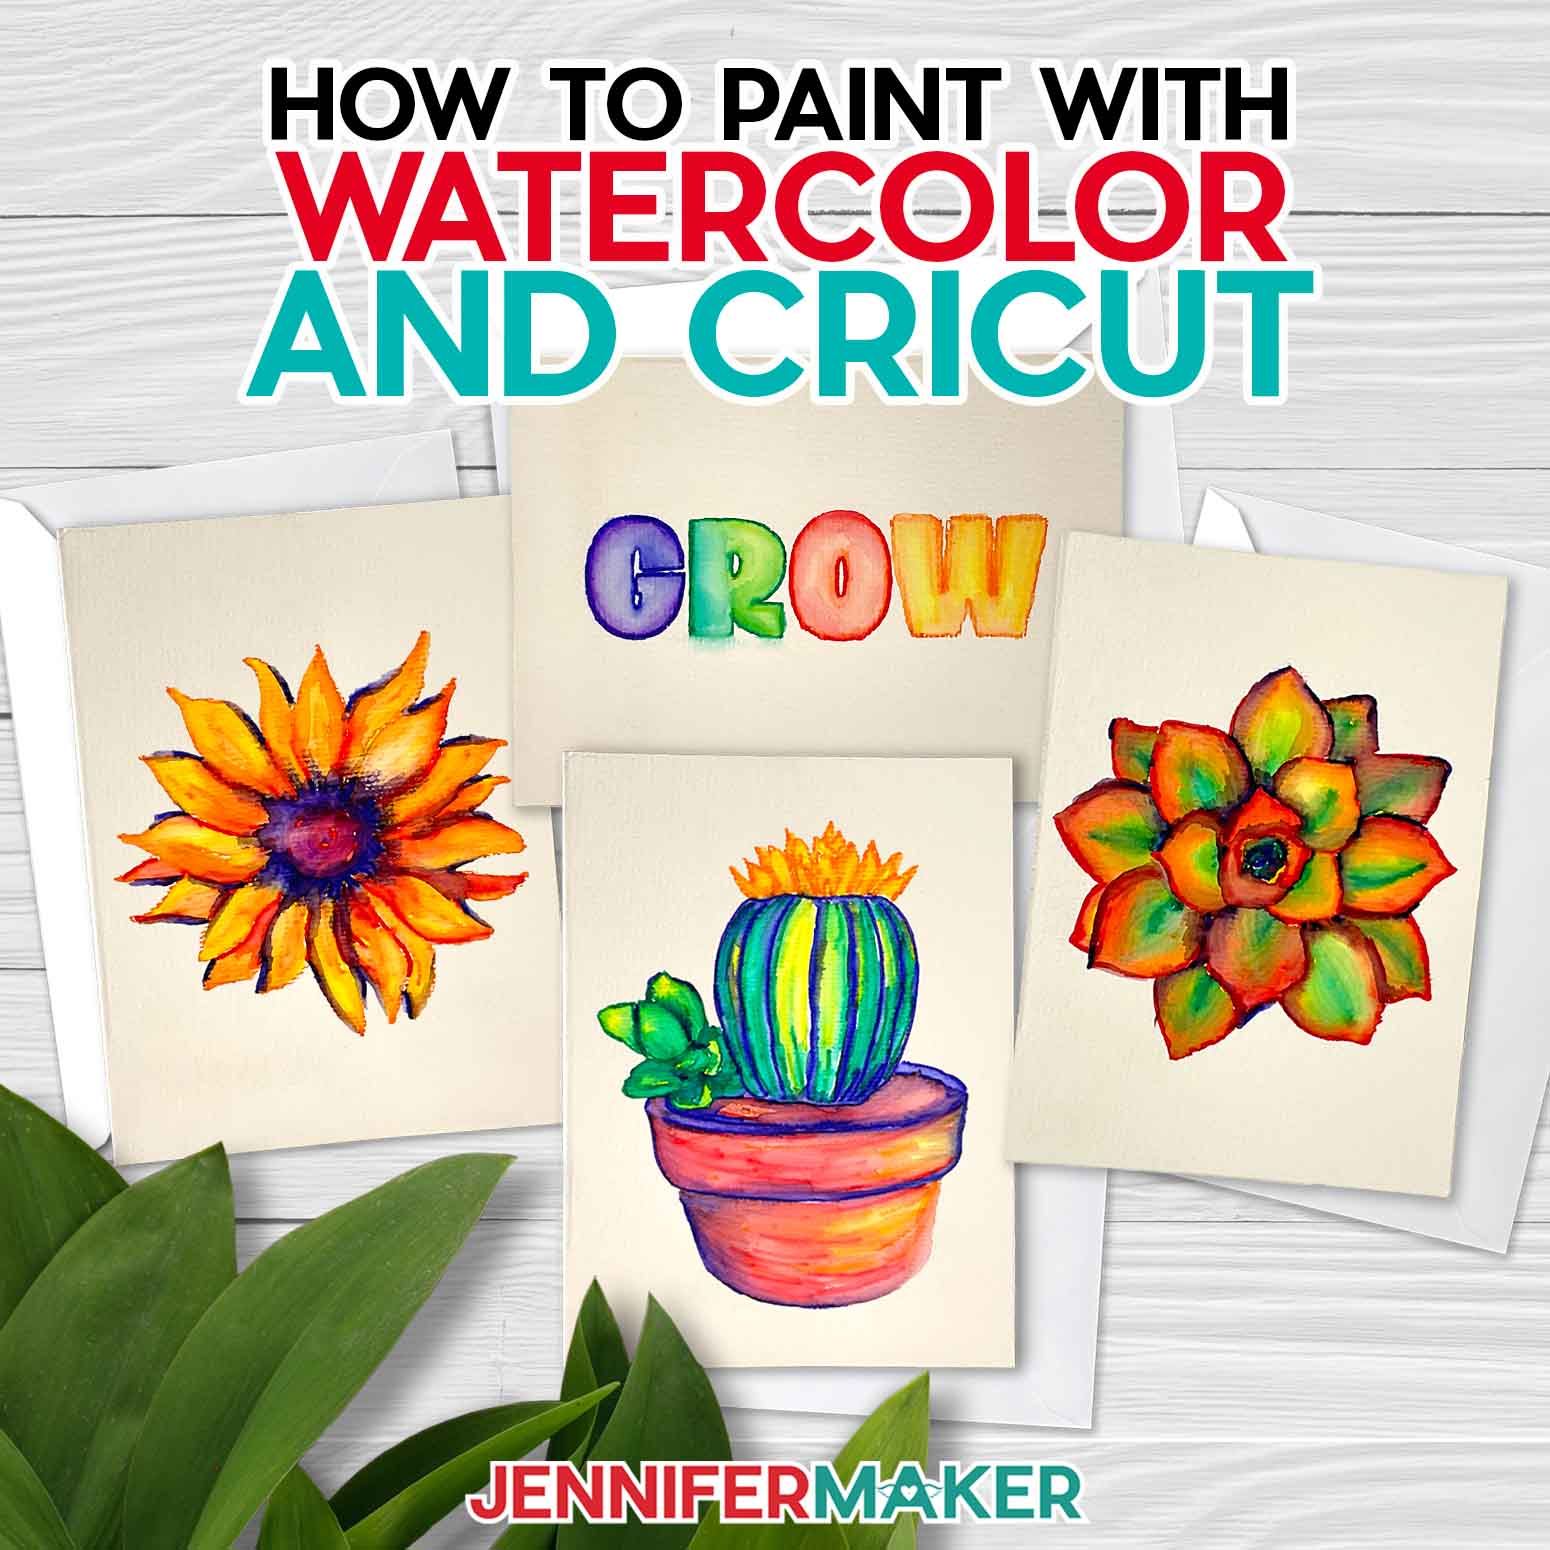 Learn how to paint watercolor plants with a Cricut! Four notecards, each with vibrant watercolor plant designs painted on the front, lie on a whitewashed wooden surface, each with an envelope. There's a sunflower, a cactus, a succulent, and a multicolored word "GROW." With JenniferMaker's tutorial, you can learn how to paint with watercolor and Cricut!